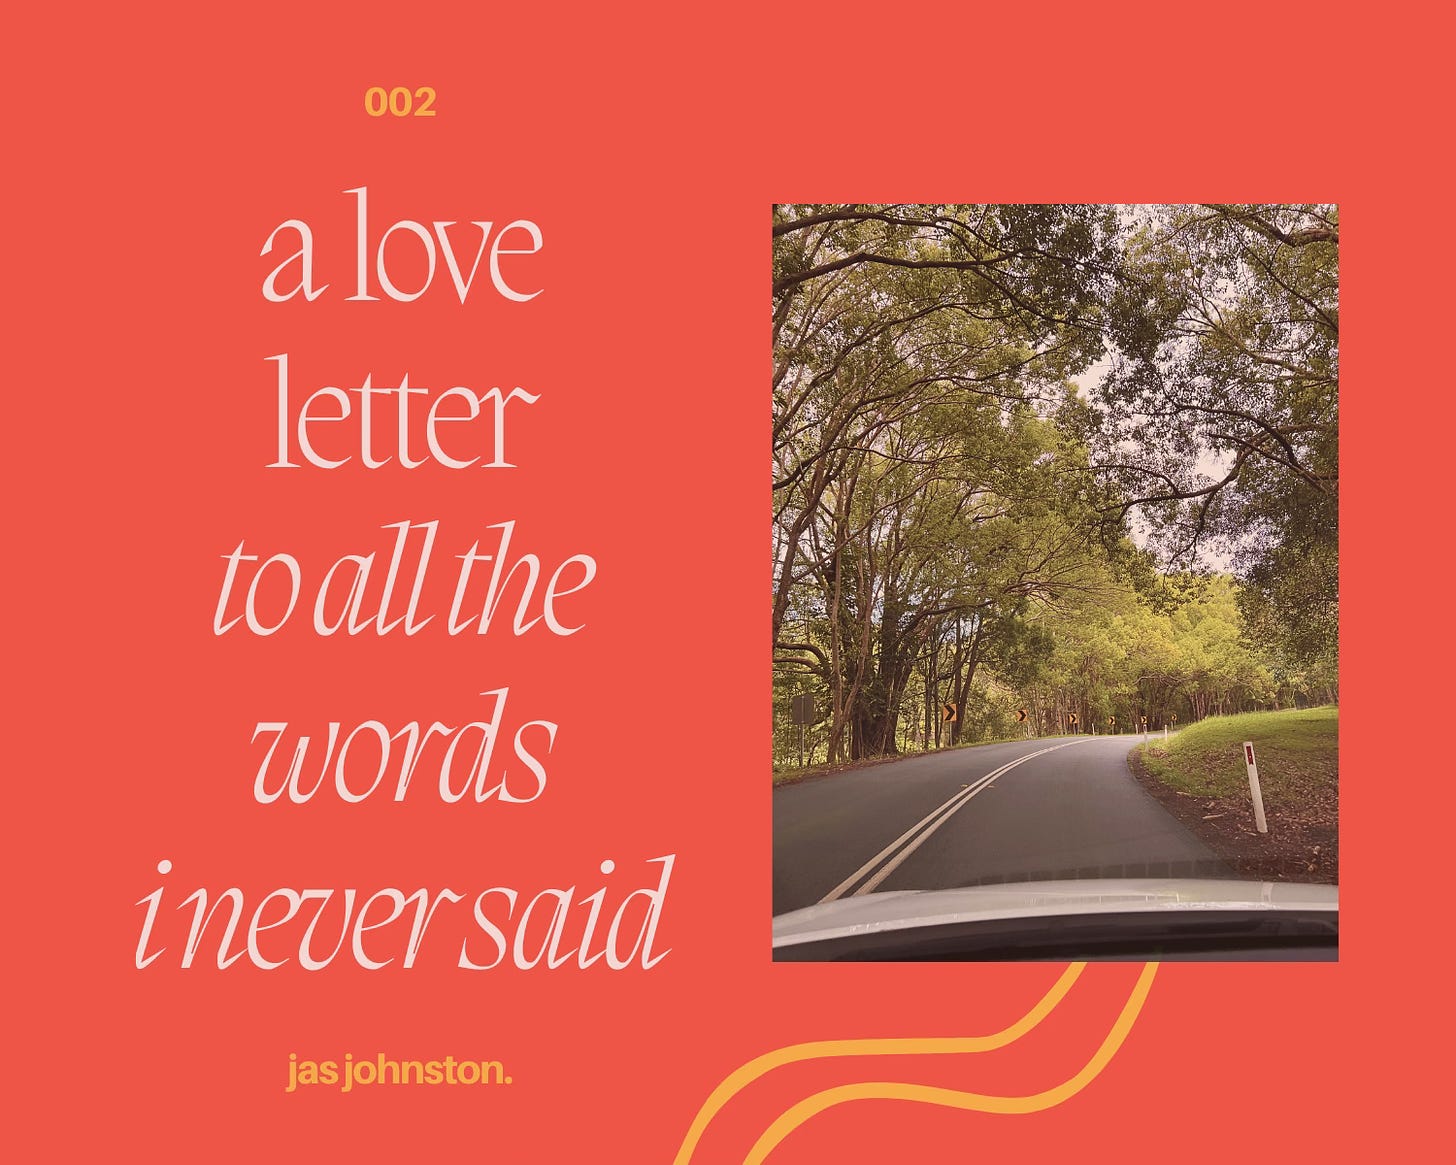 a coral background with a picture of the road in front of the car. trees line the road. the words on the image say: a love letter to all the words i never said.